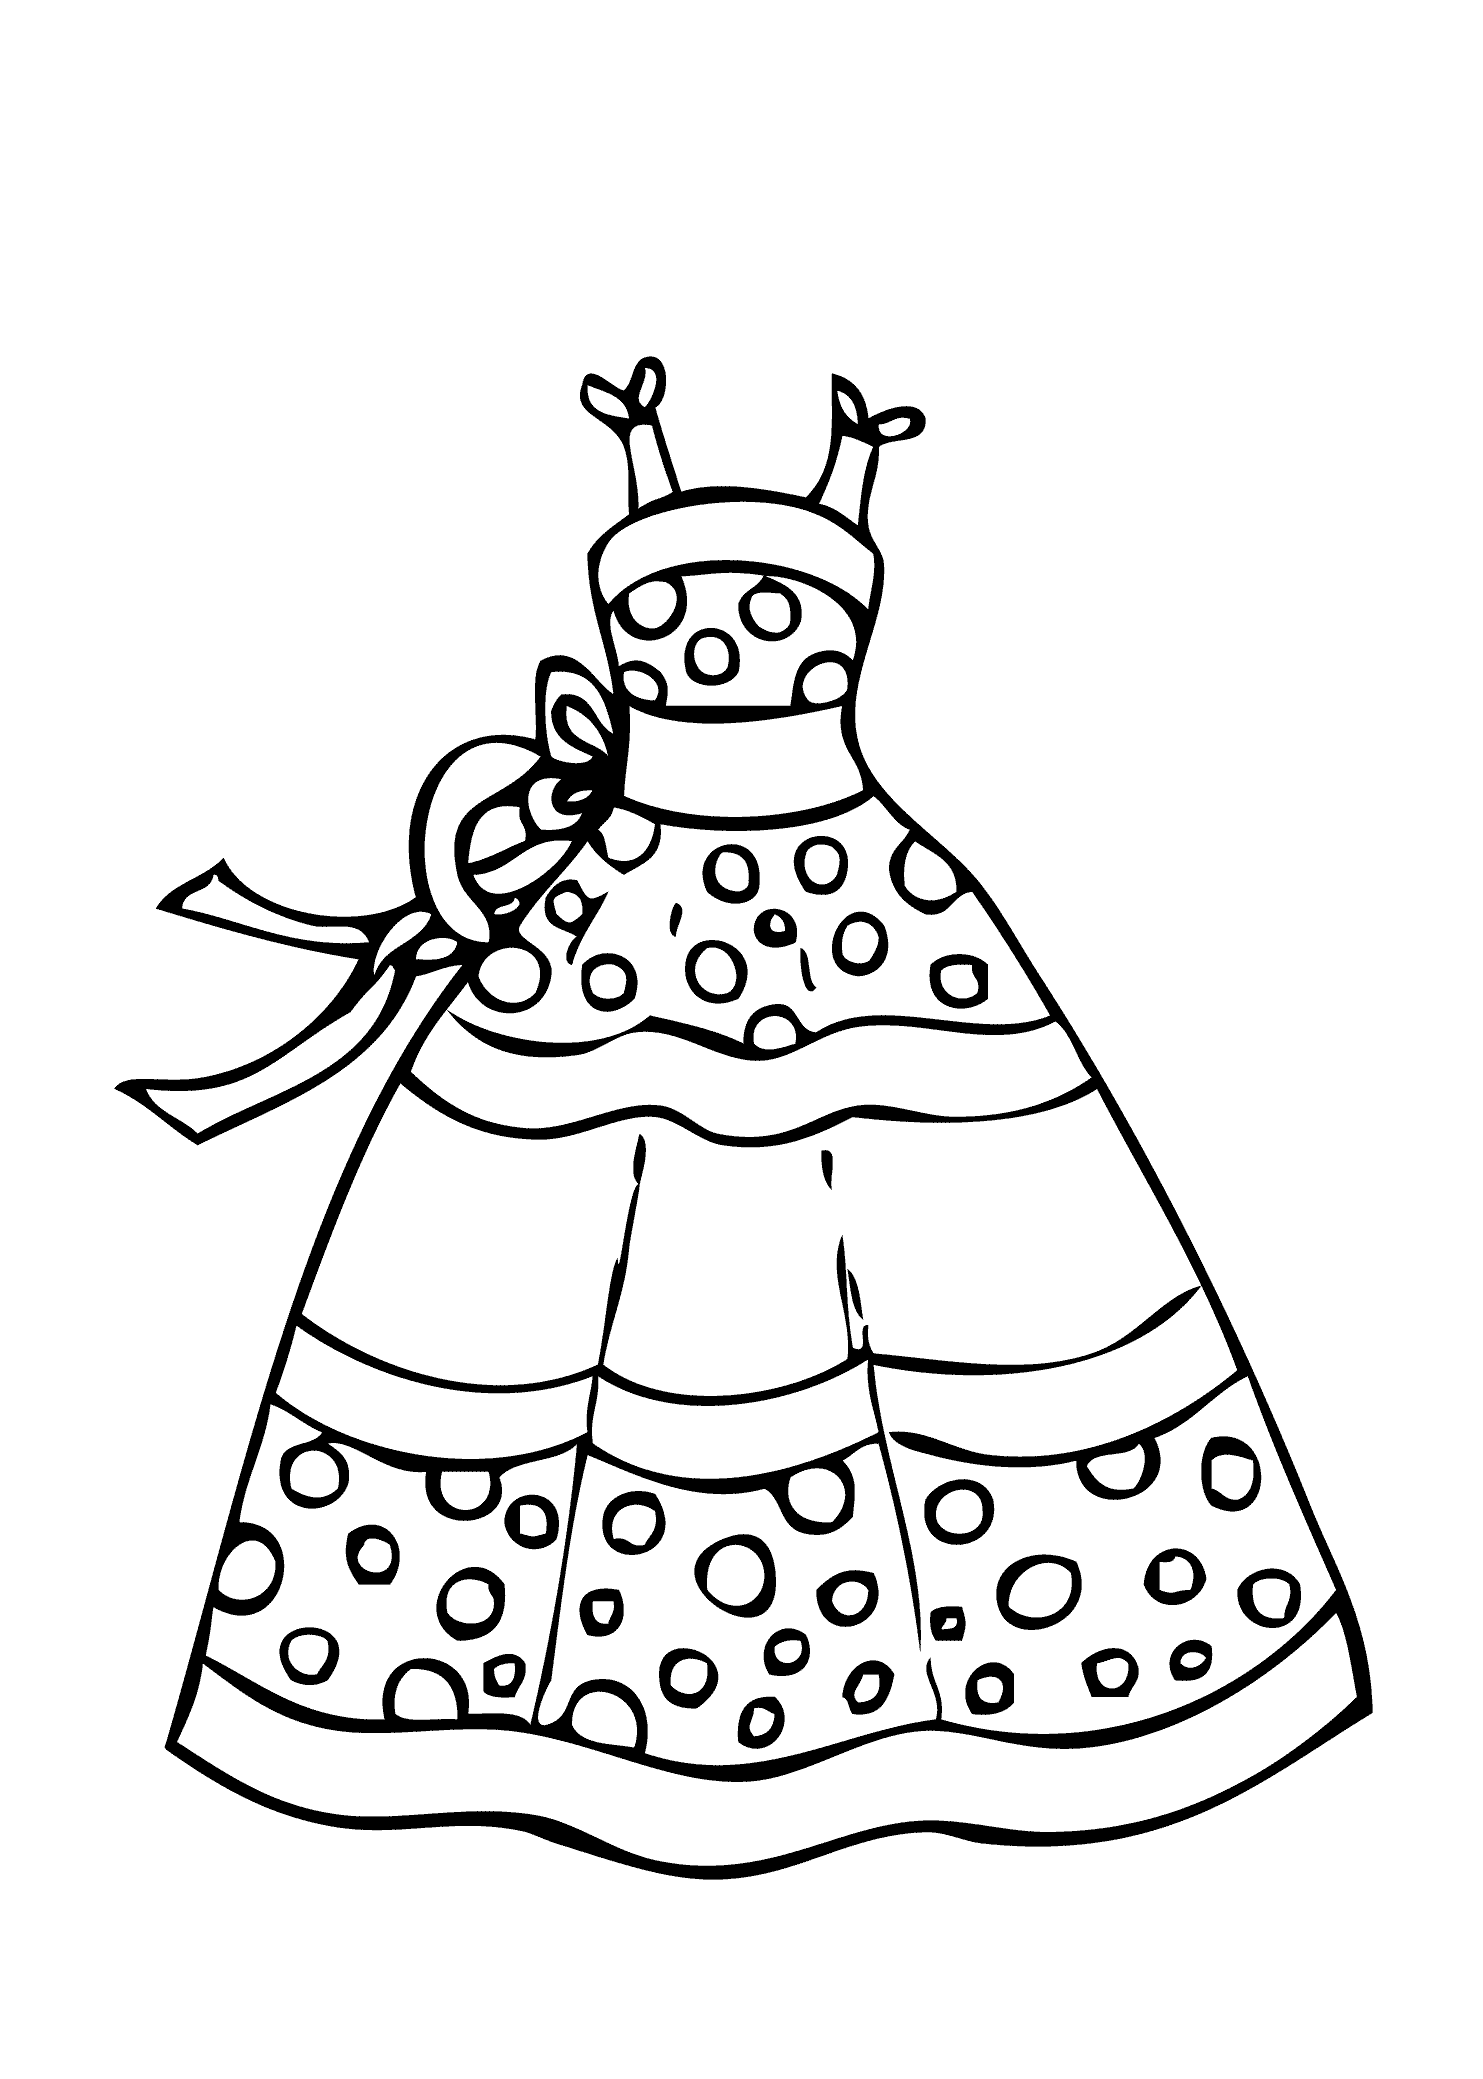 colouring pages dresses the learning site august 2012 colouring pages dresses 